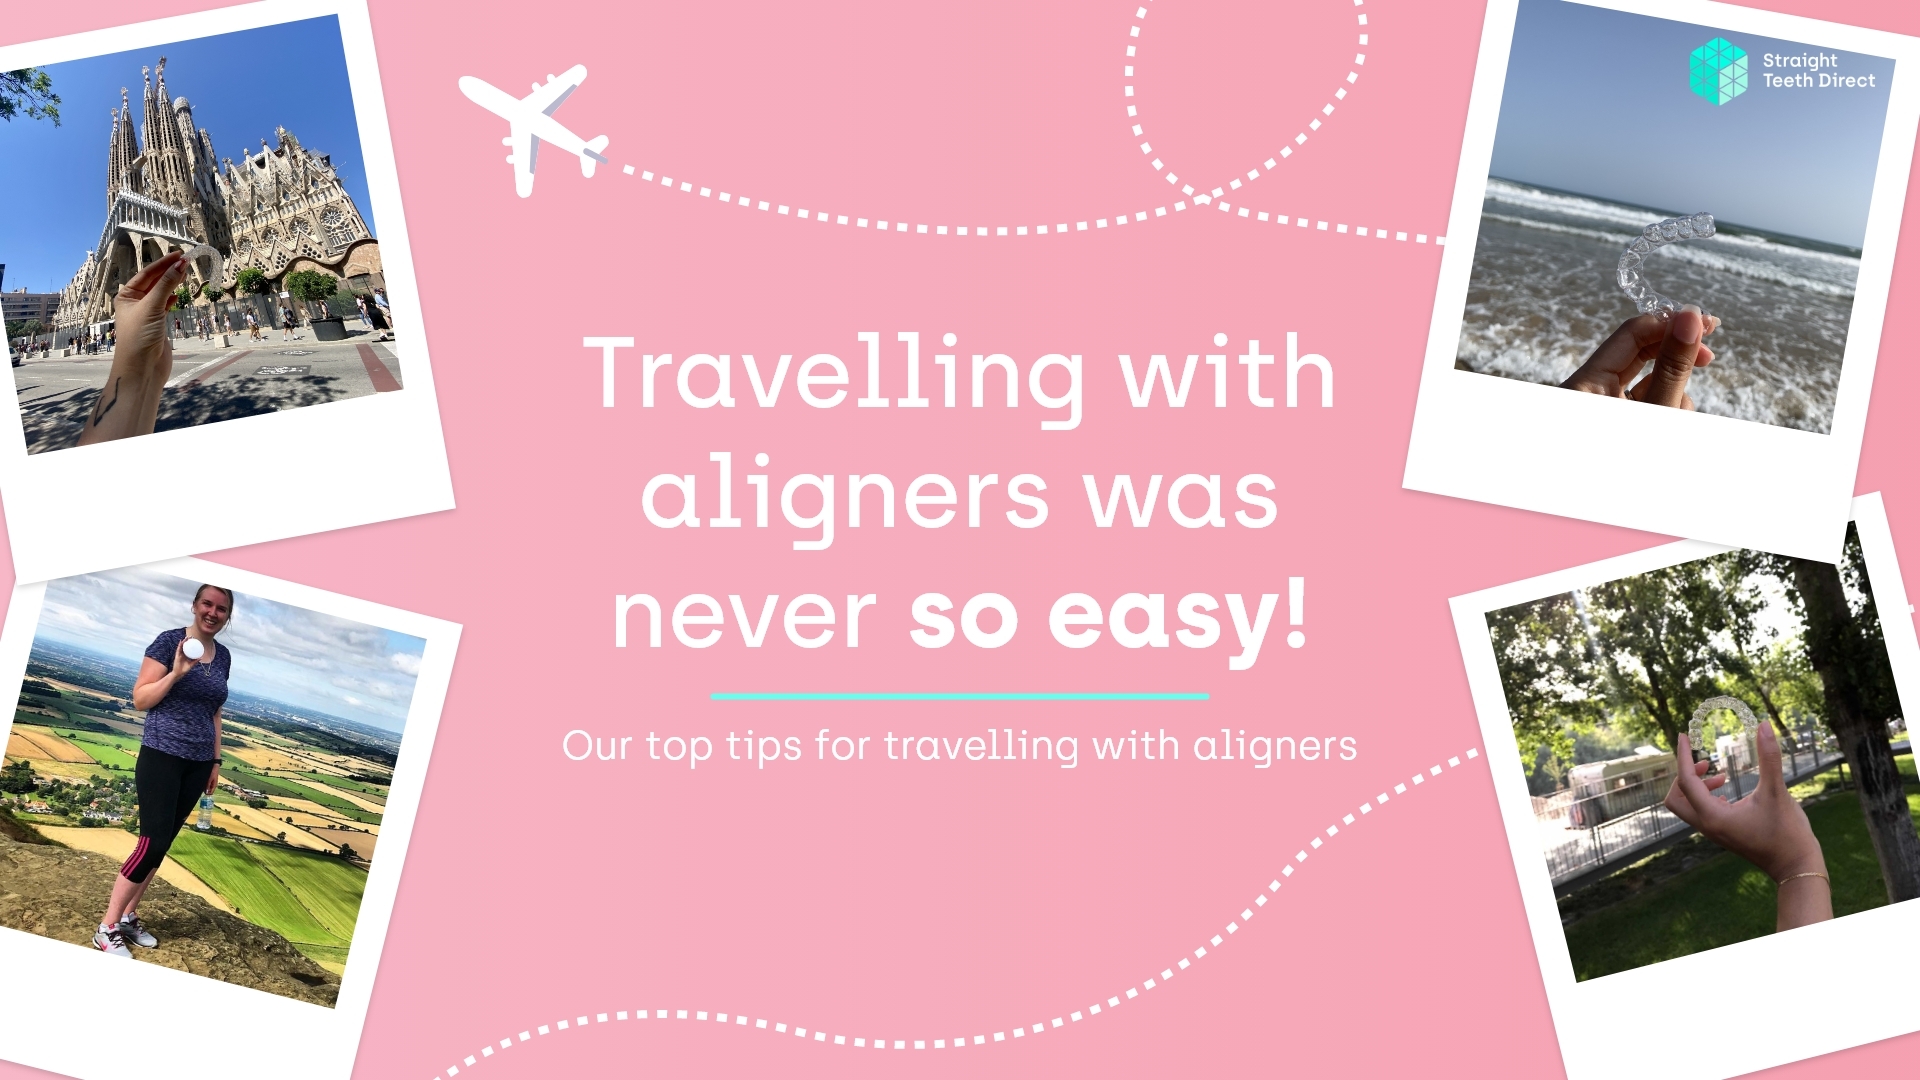 Travelling with aligners was never so easy!